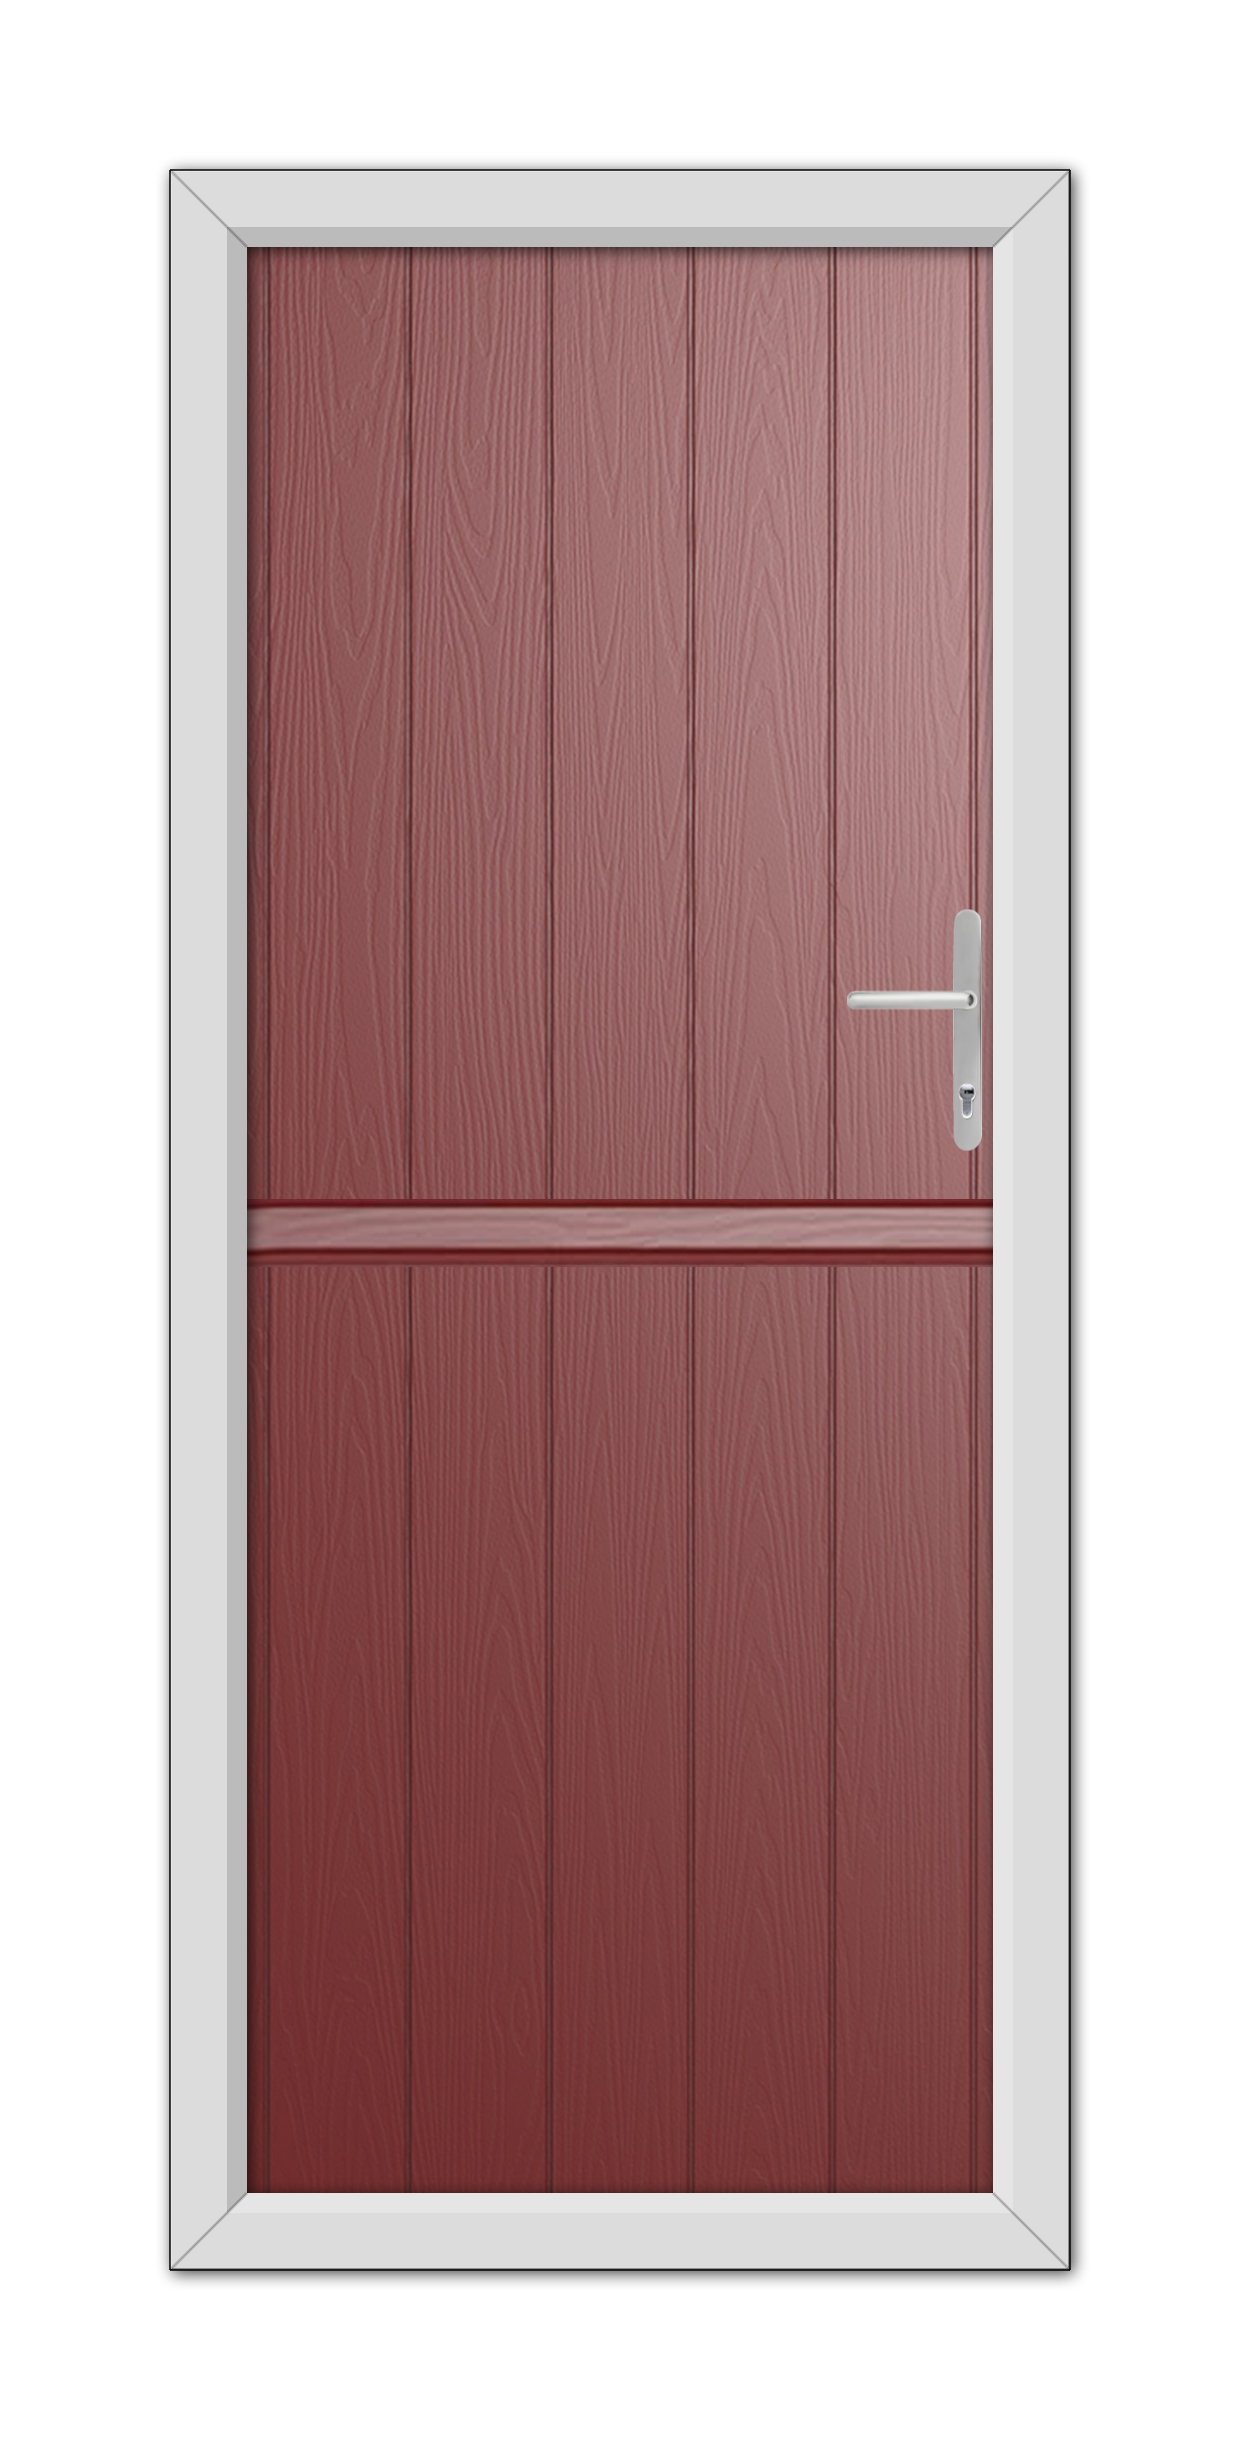 A Red Norfolk Solid Stable Composite Door 48mm Timber Core with a metal handle, framed by a white door frame, depicted in a realistic style.